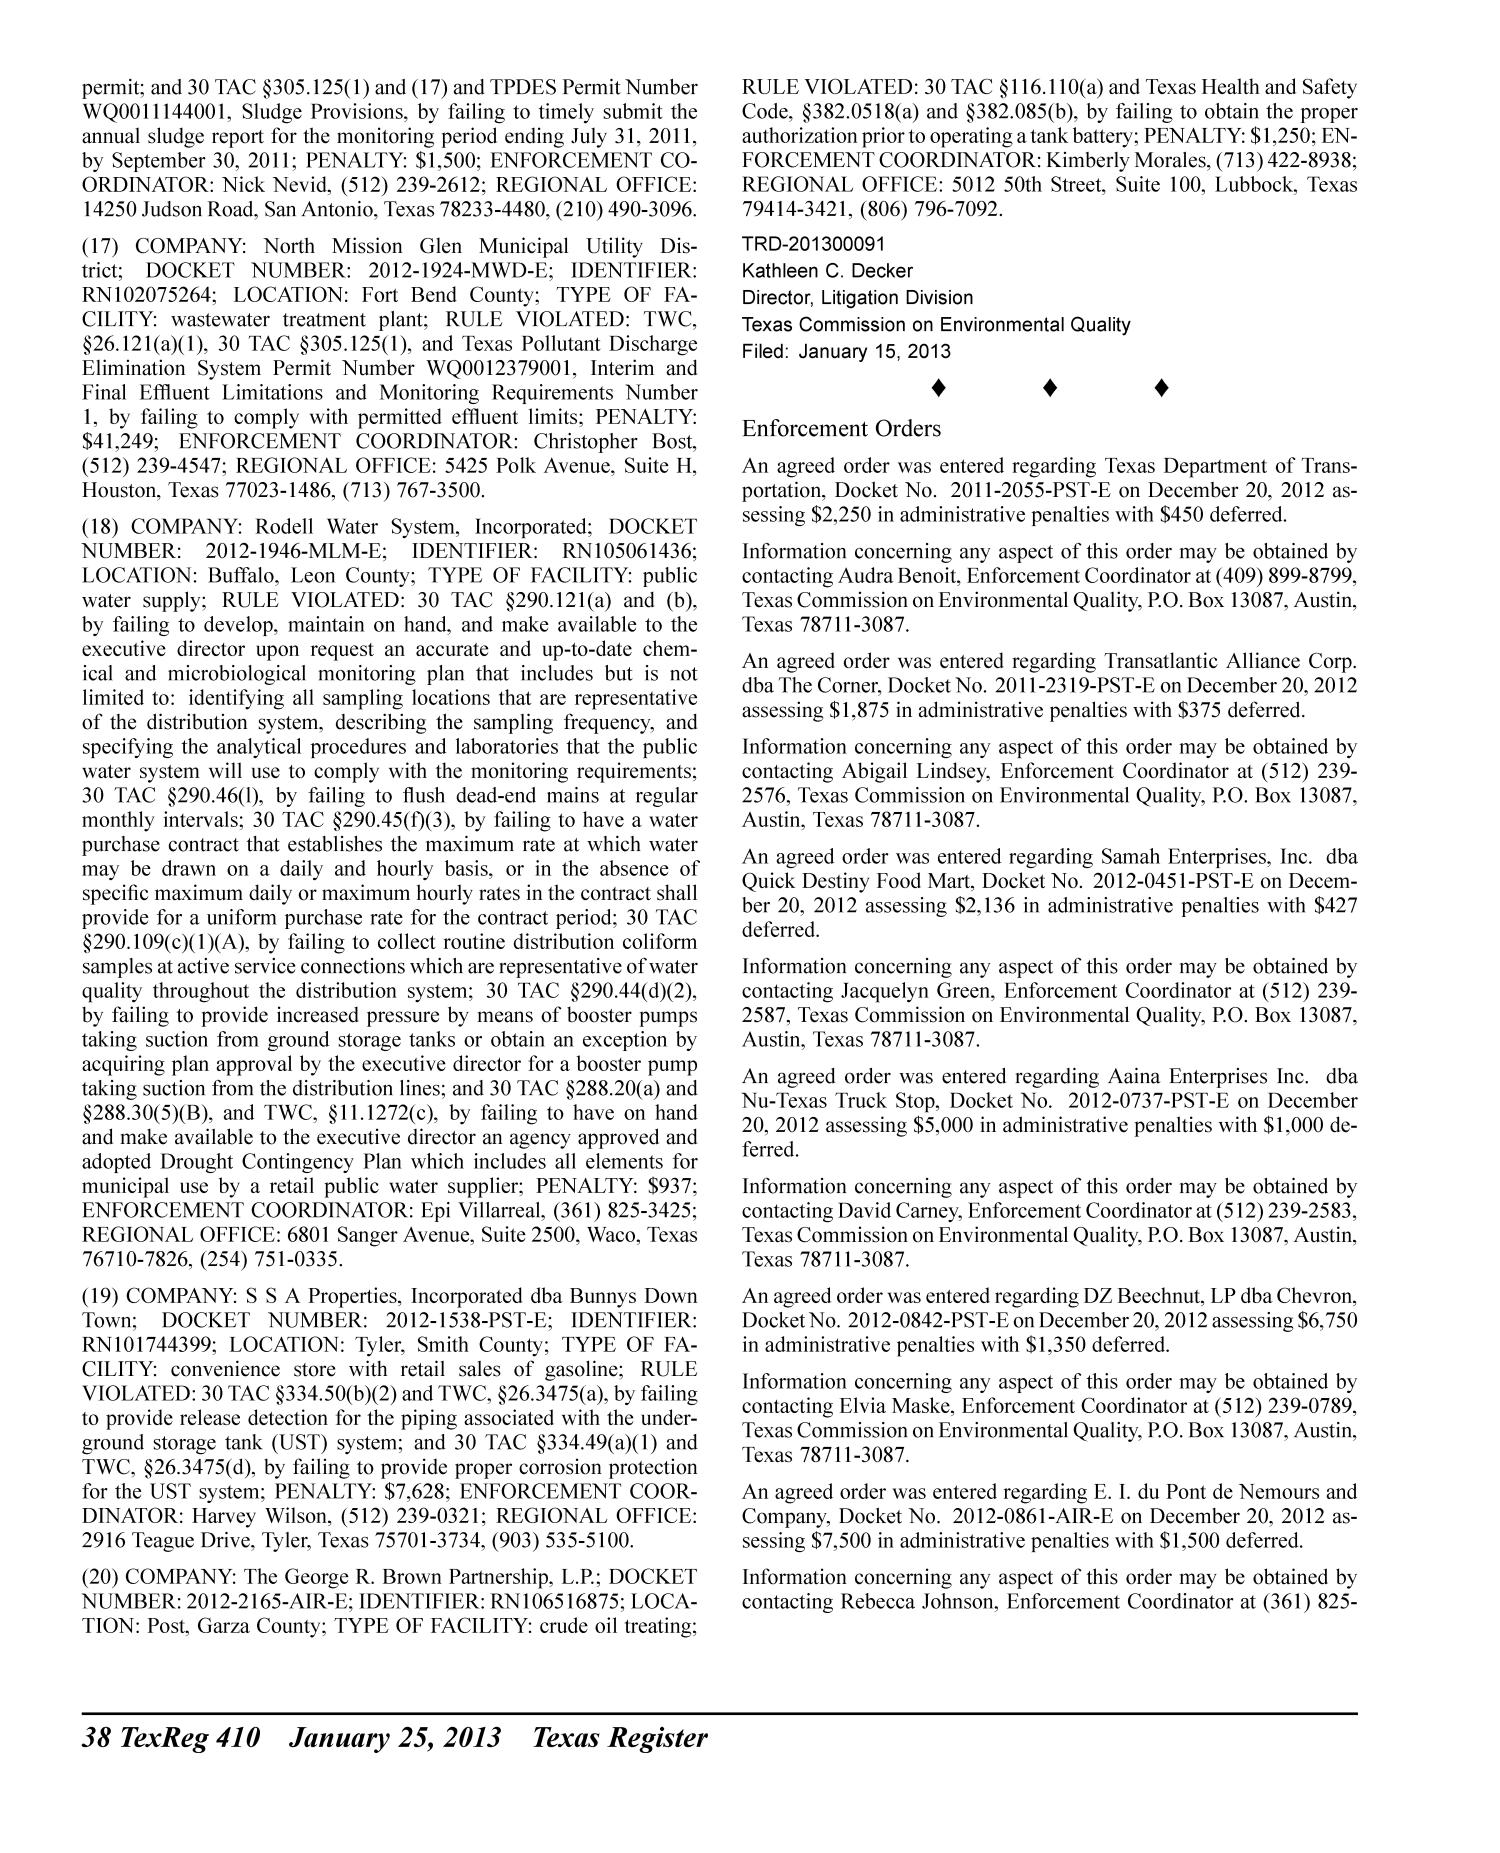 Texas Register, Volume 38, Number 4, Pages 331-442, January 25, 2013
                                                
                                                    410
                                                